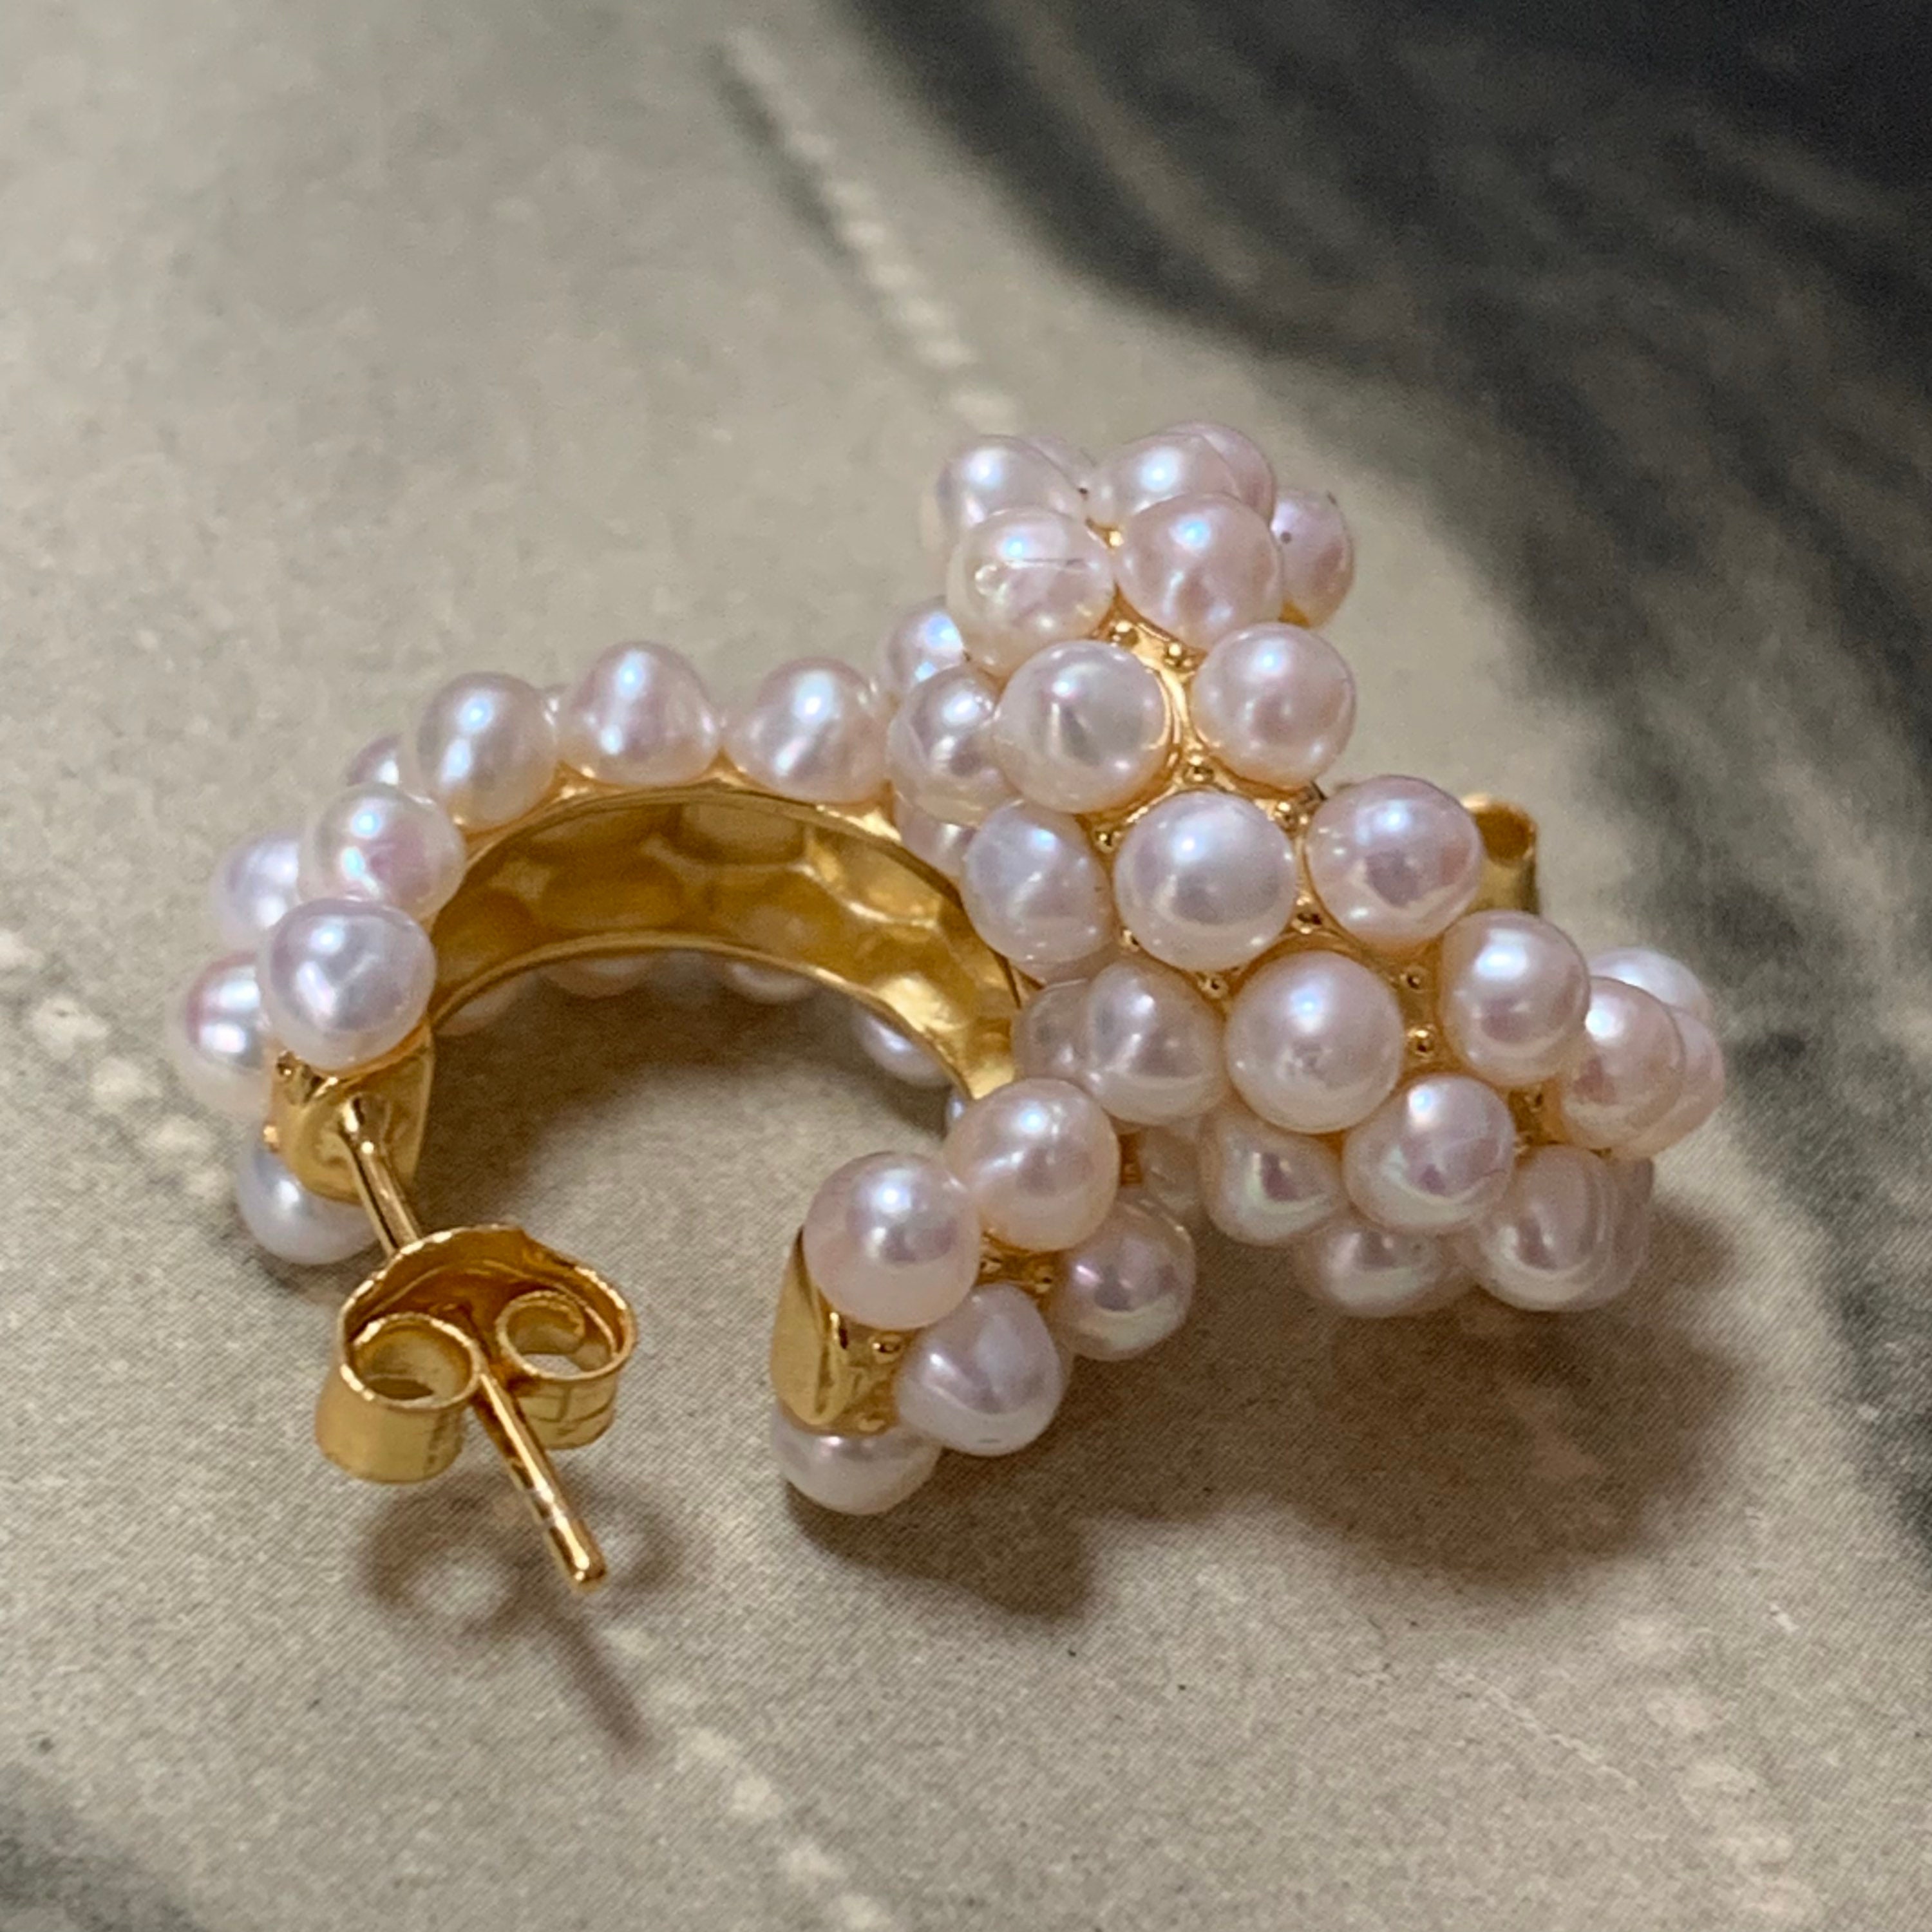 Freshwater Pearl Half Hoop Earring in 18K Gold Gilded 925 Silver For Pierced Ears. These Are A Stunning Pair Of Earrings